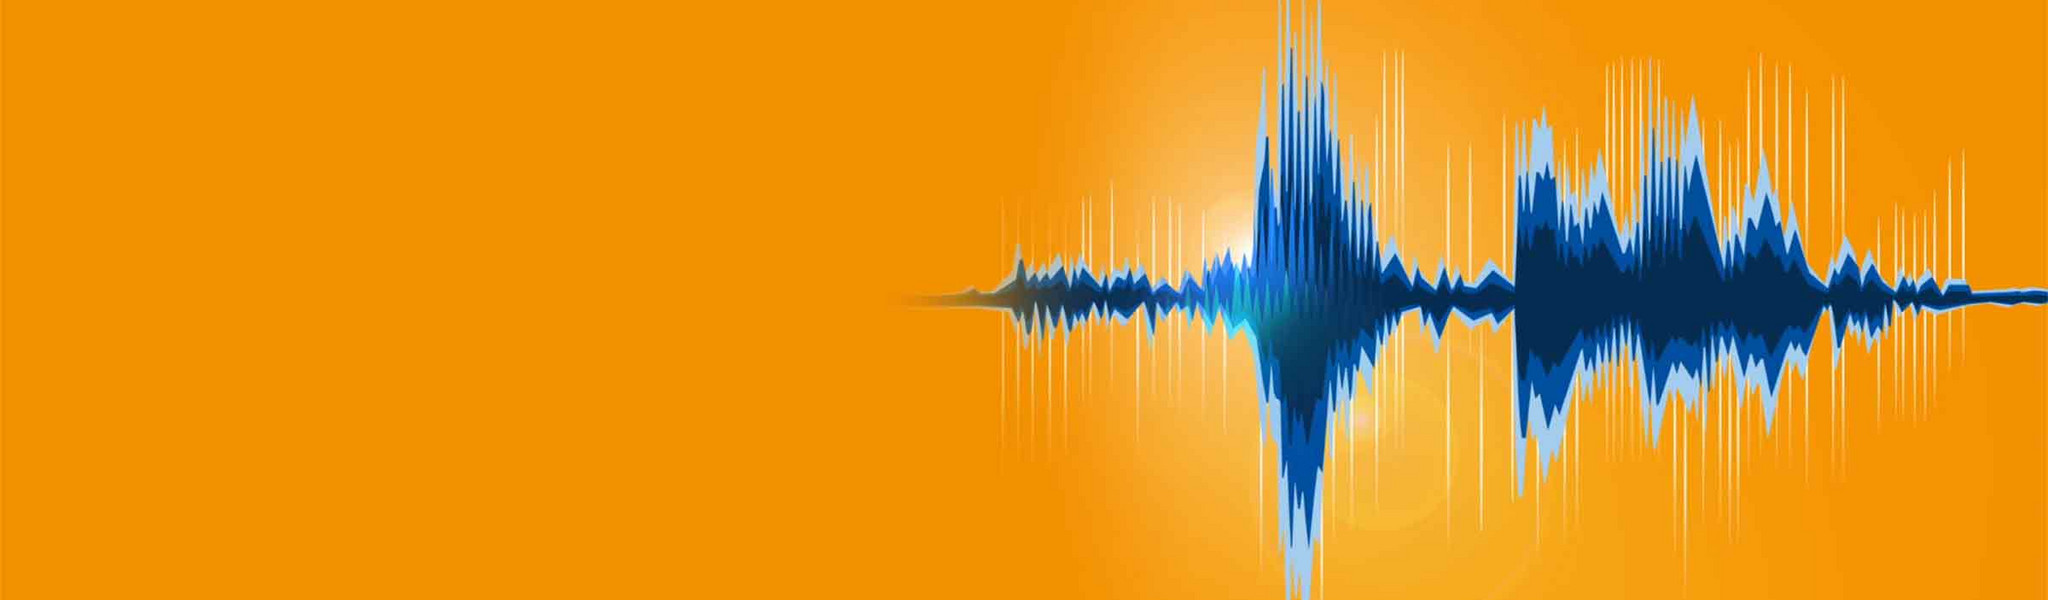 Illustration of an audio frequency in different tints of blue on an orange background.